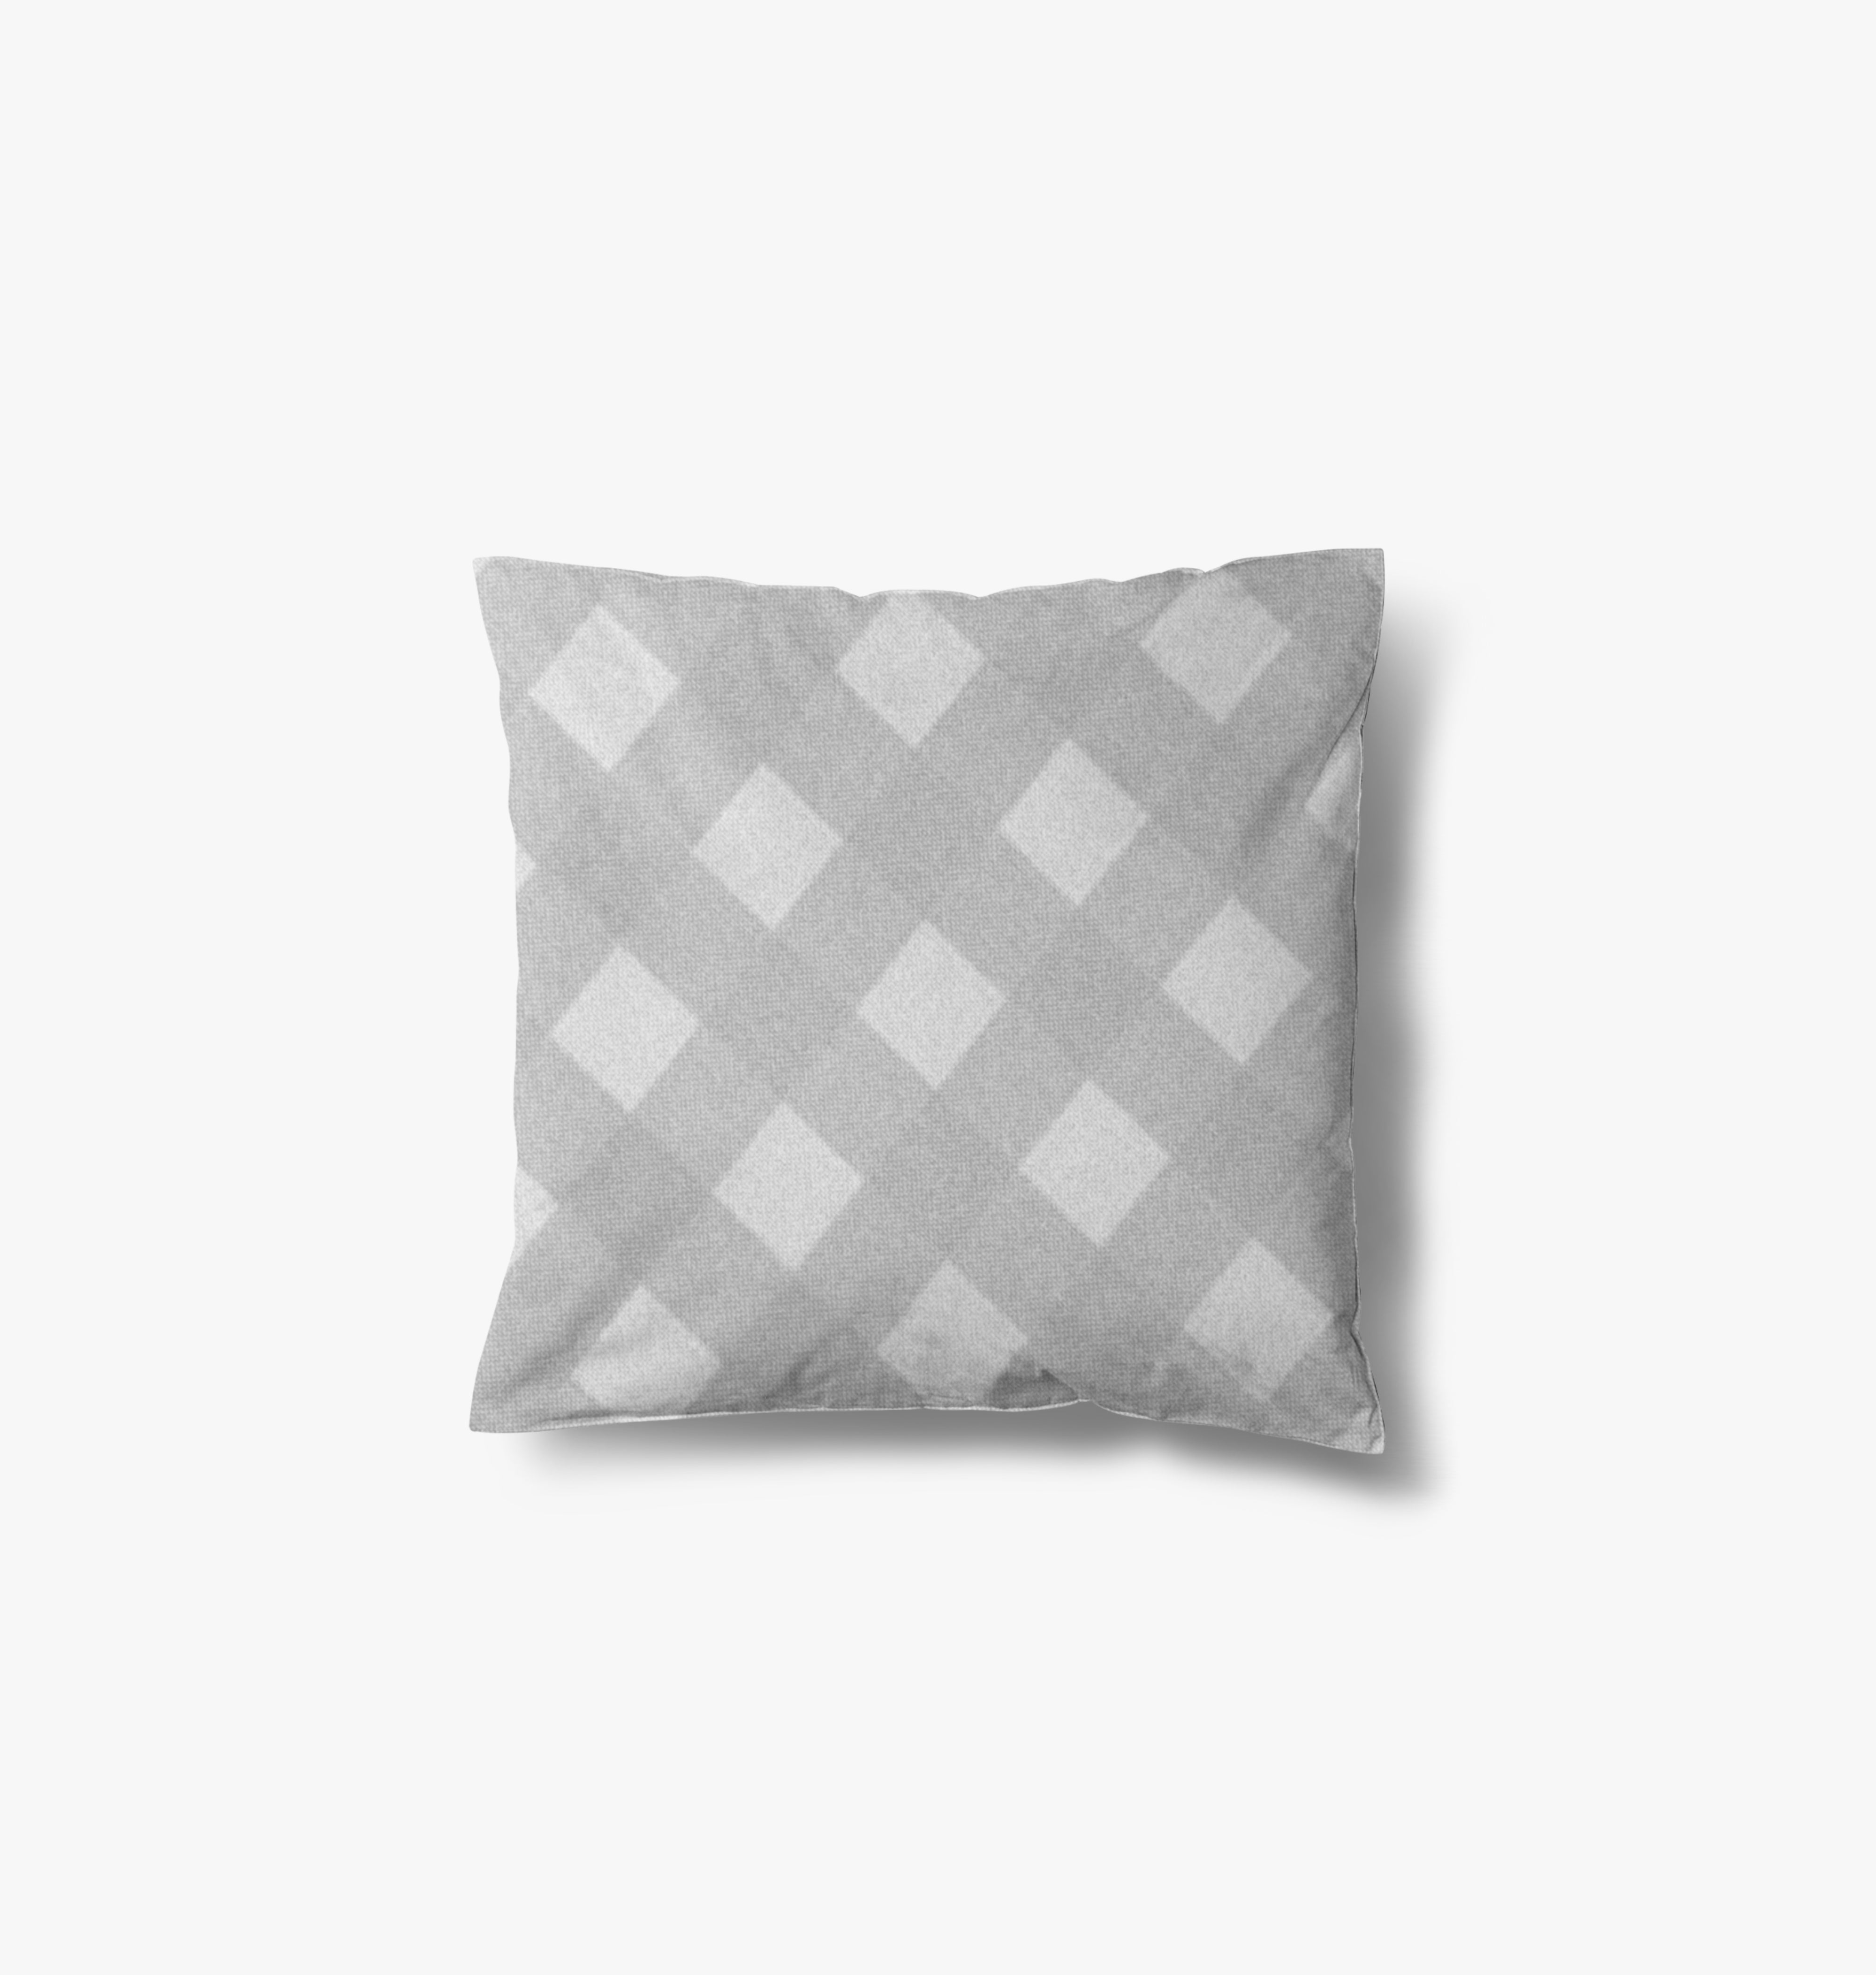 Throw pillow - Mаny Colors options - Longer color text